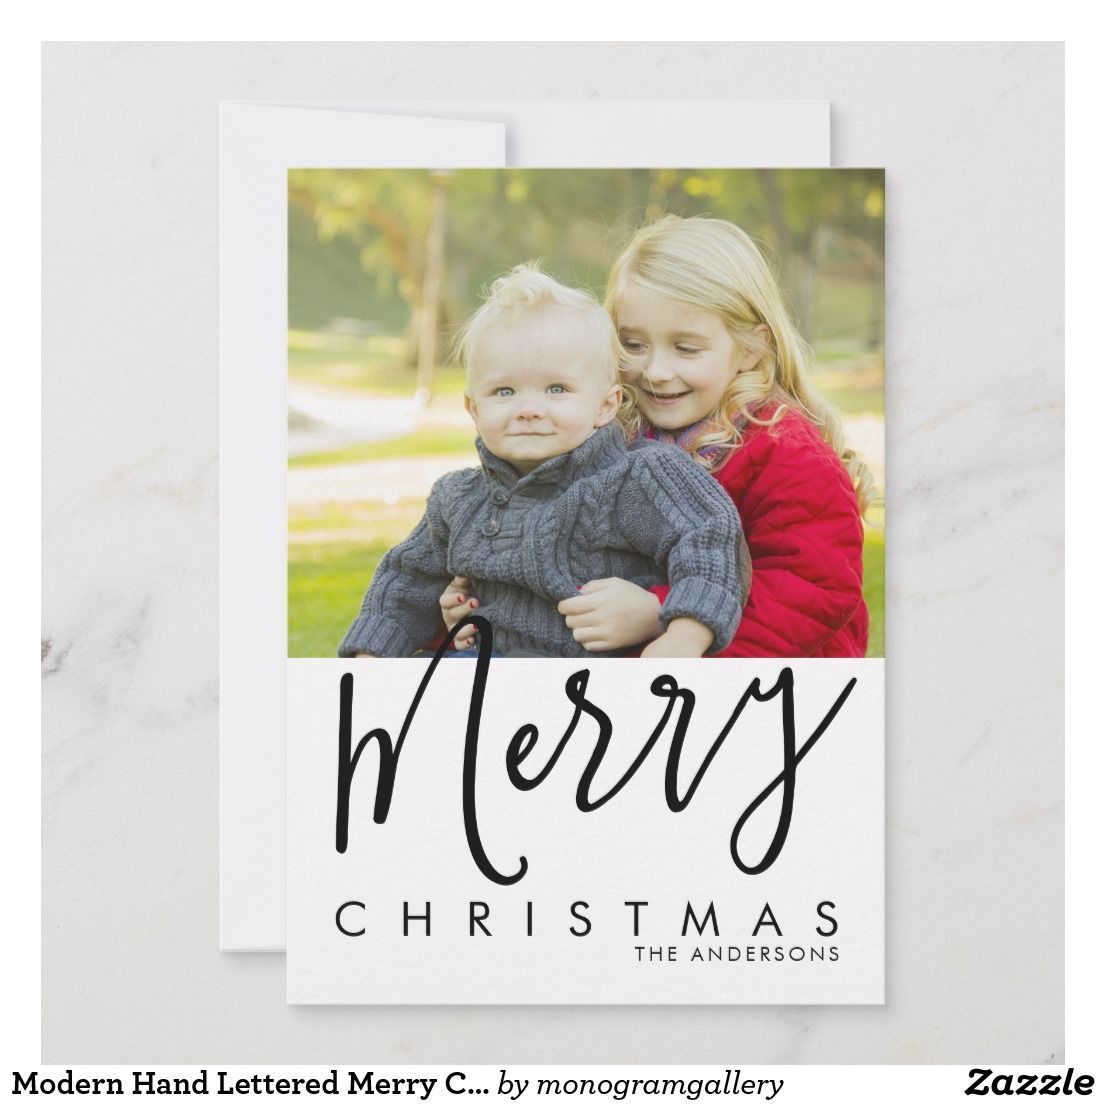 Modern Hand Lettered Merry Christmas Script Photo Holiday Card | Zazzle.com -   17 holiday Word simple ideas